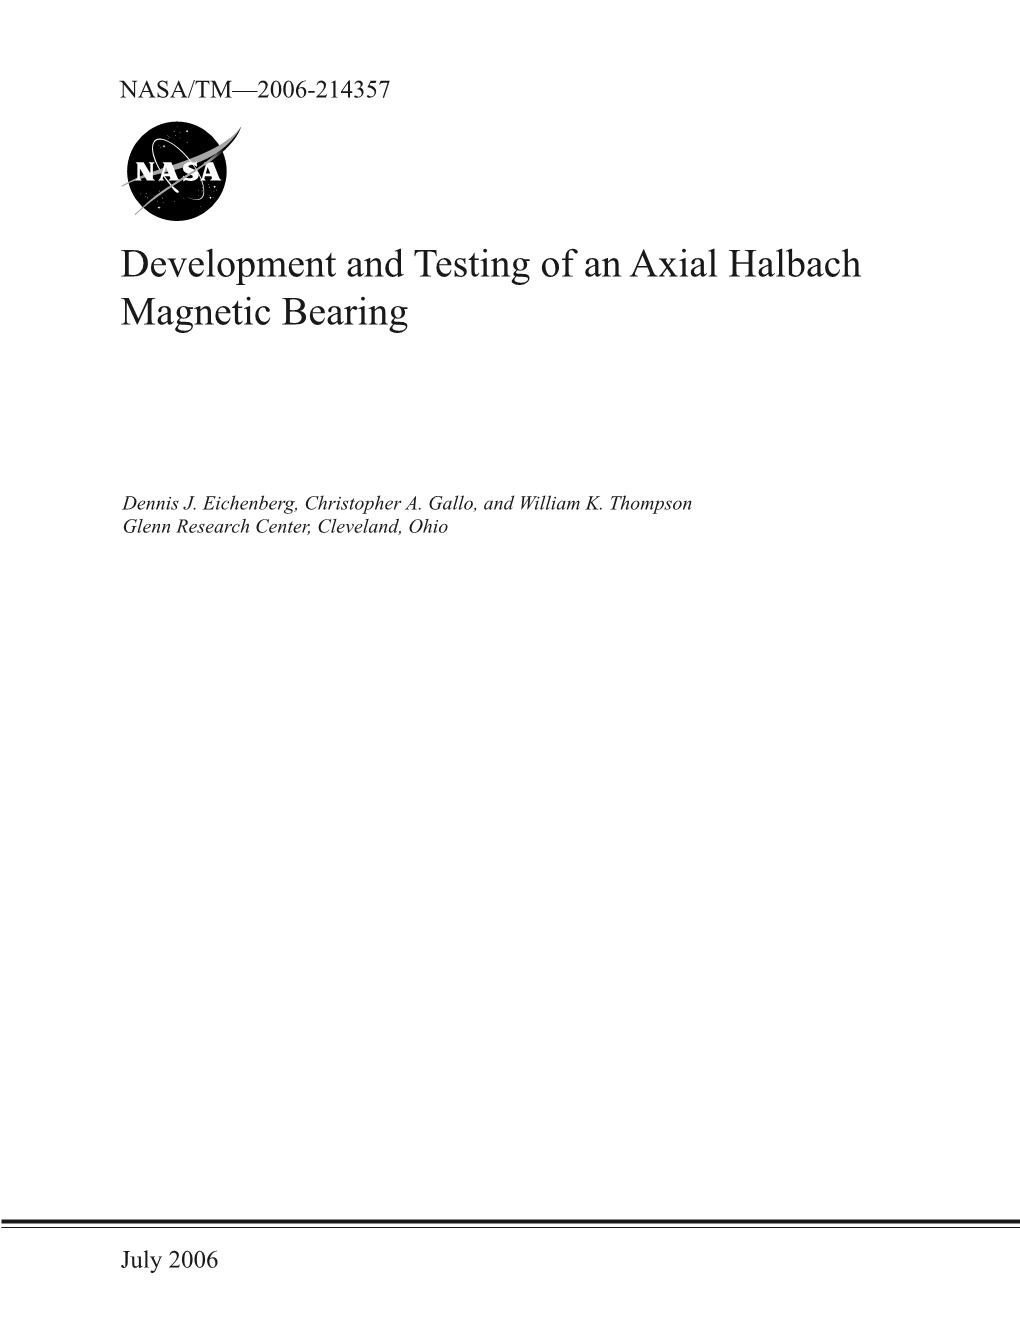 Development and Testing of an Axial Halbach Magnetic Bearing